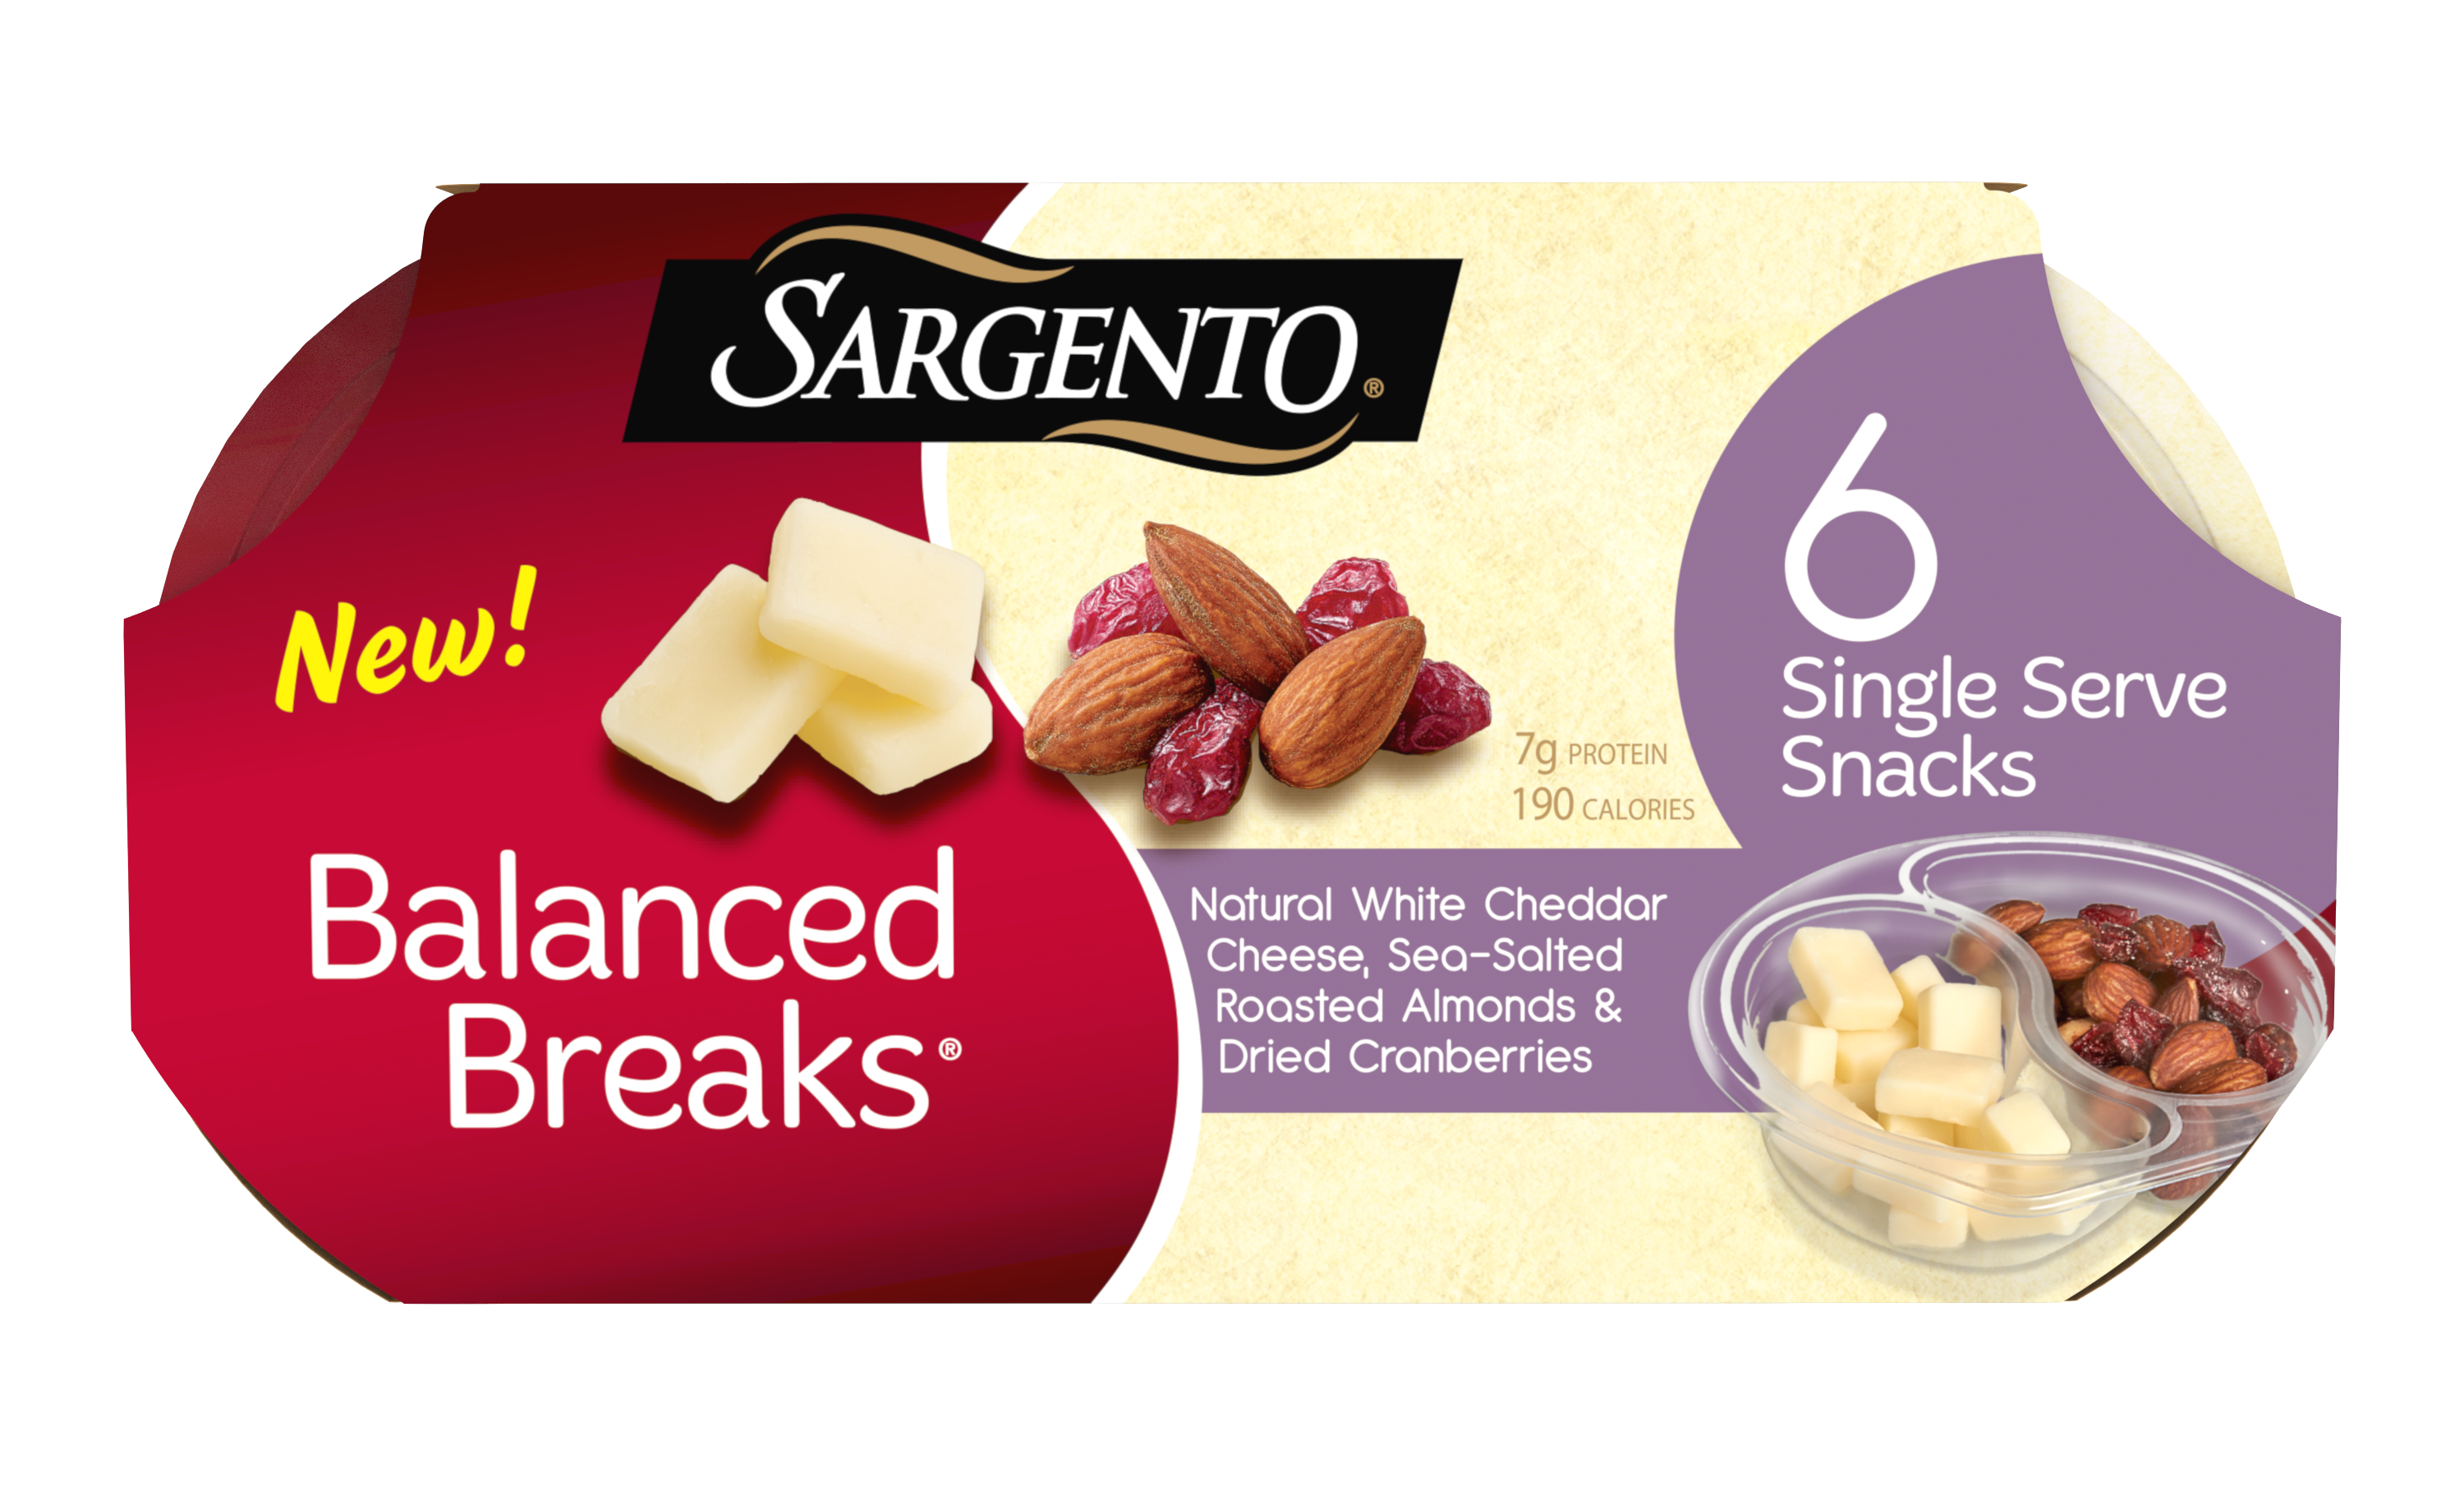 Sargento® Balanced Breaks® Natural White Cheddar Cheese, Sea-Salted Roasted Almonds, Dried Cranberries, 6-Pack